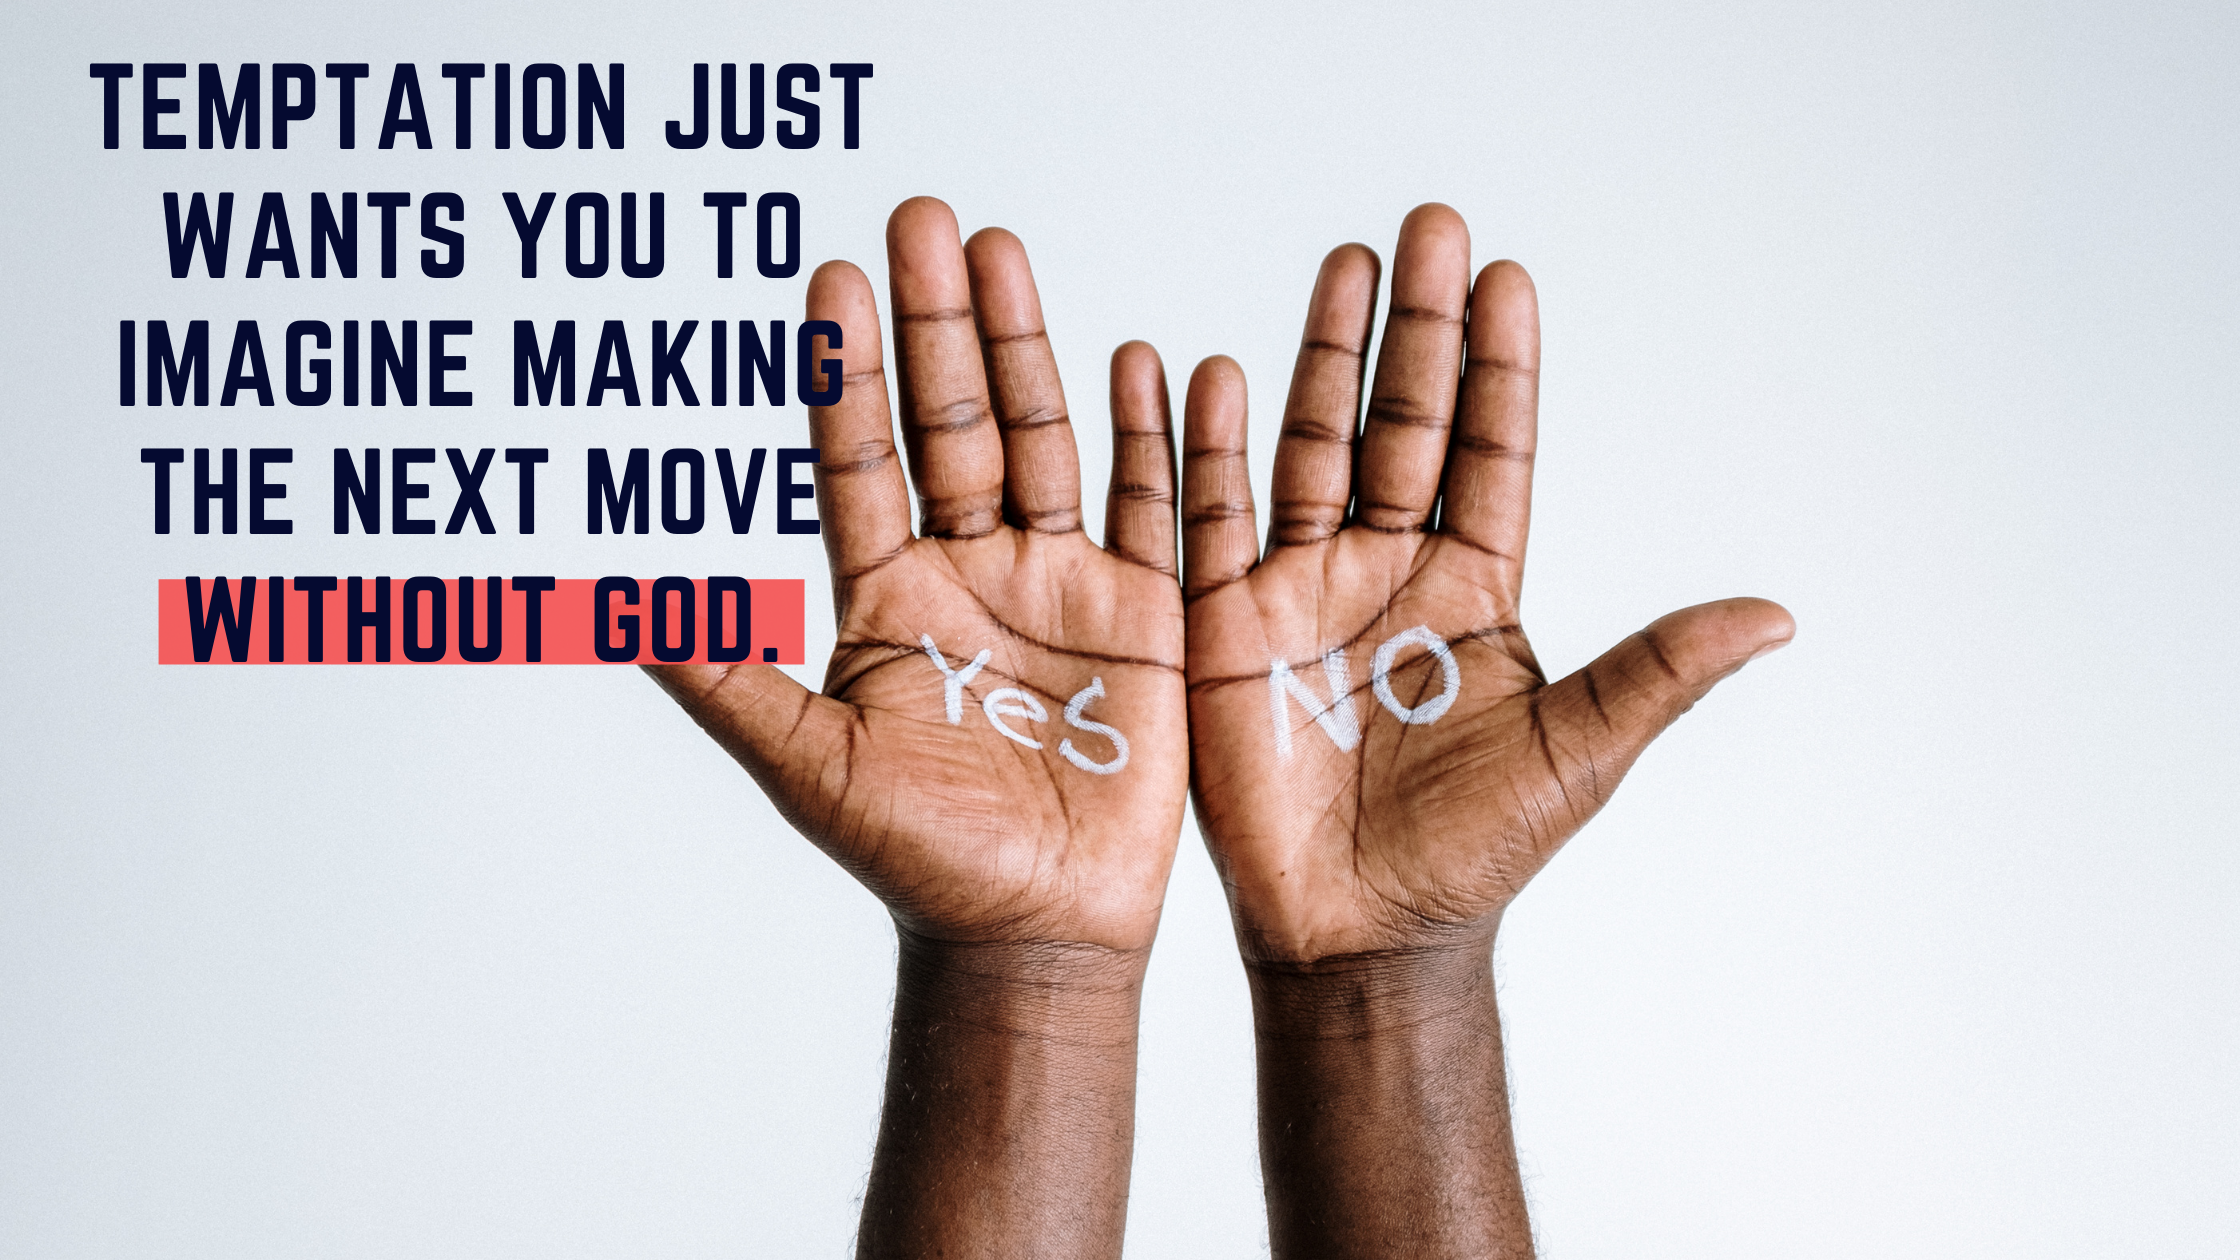 Temptation just wants you to imagine making the next move without God.